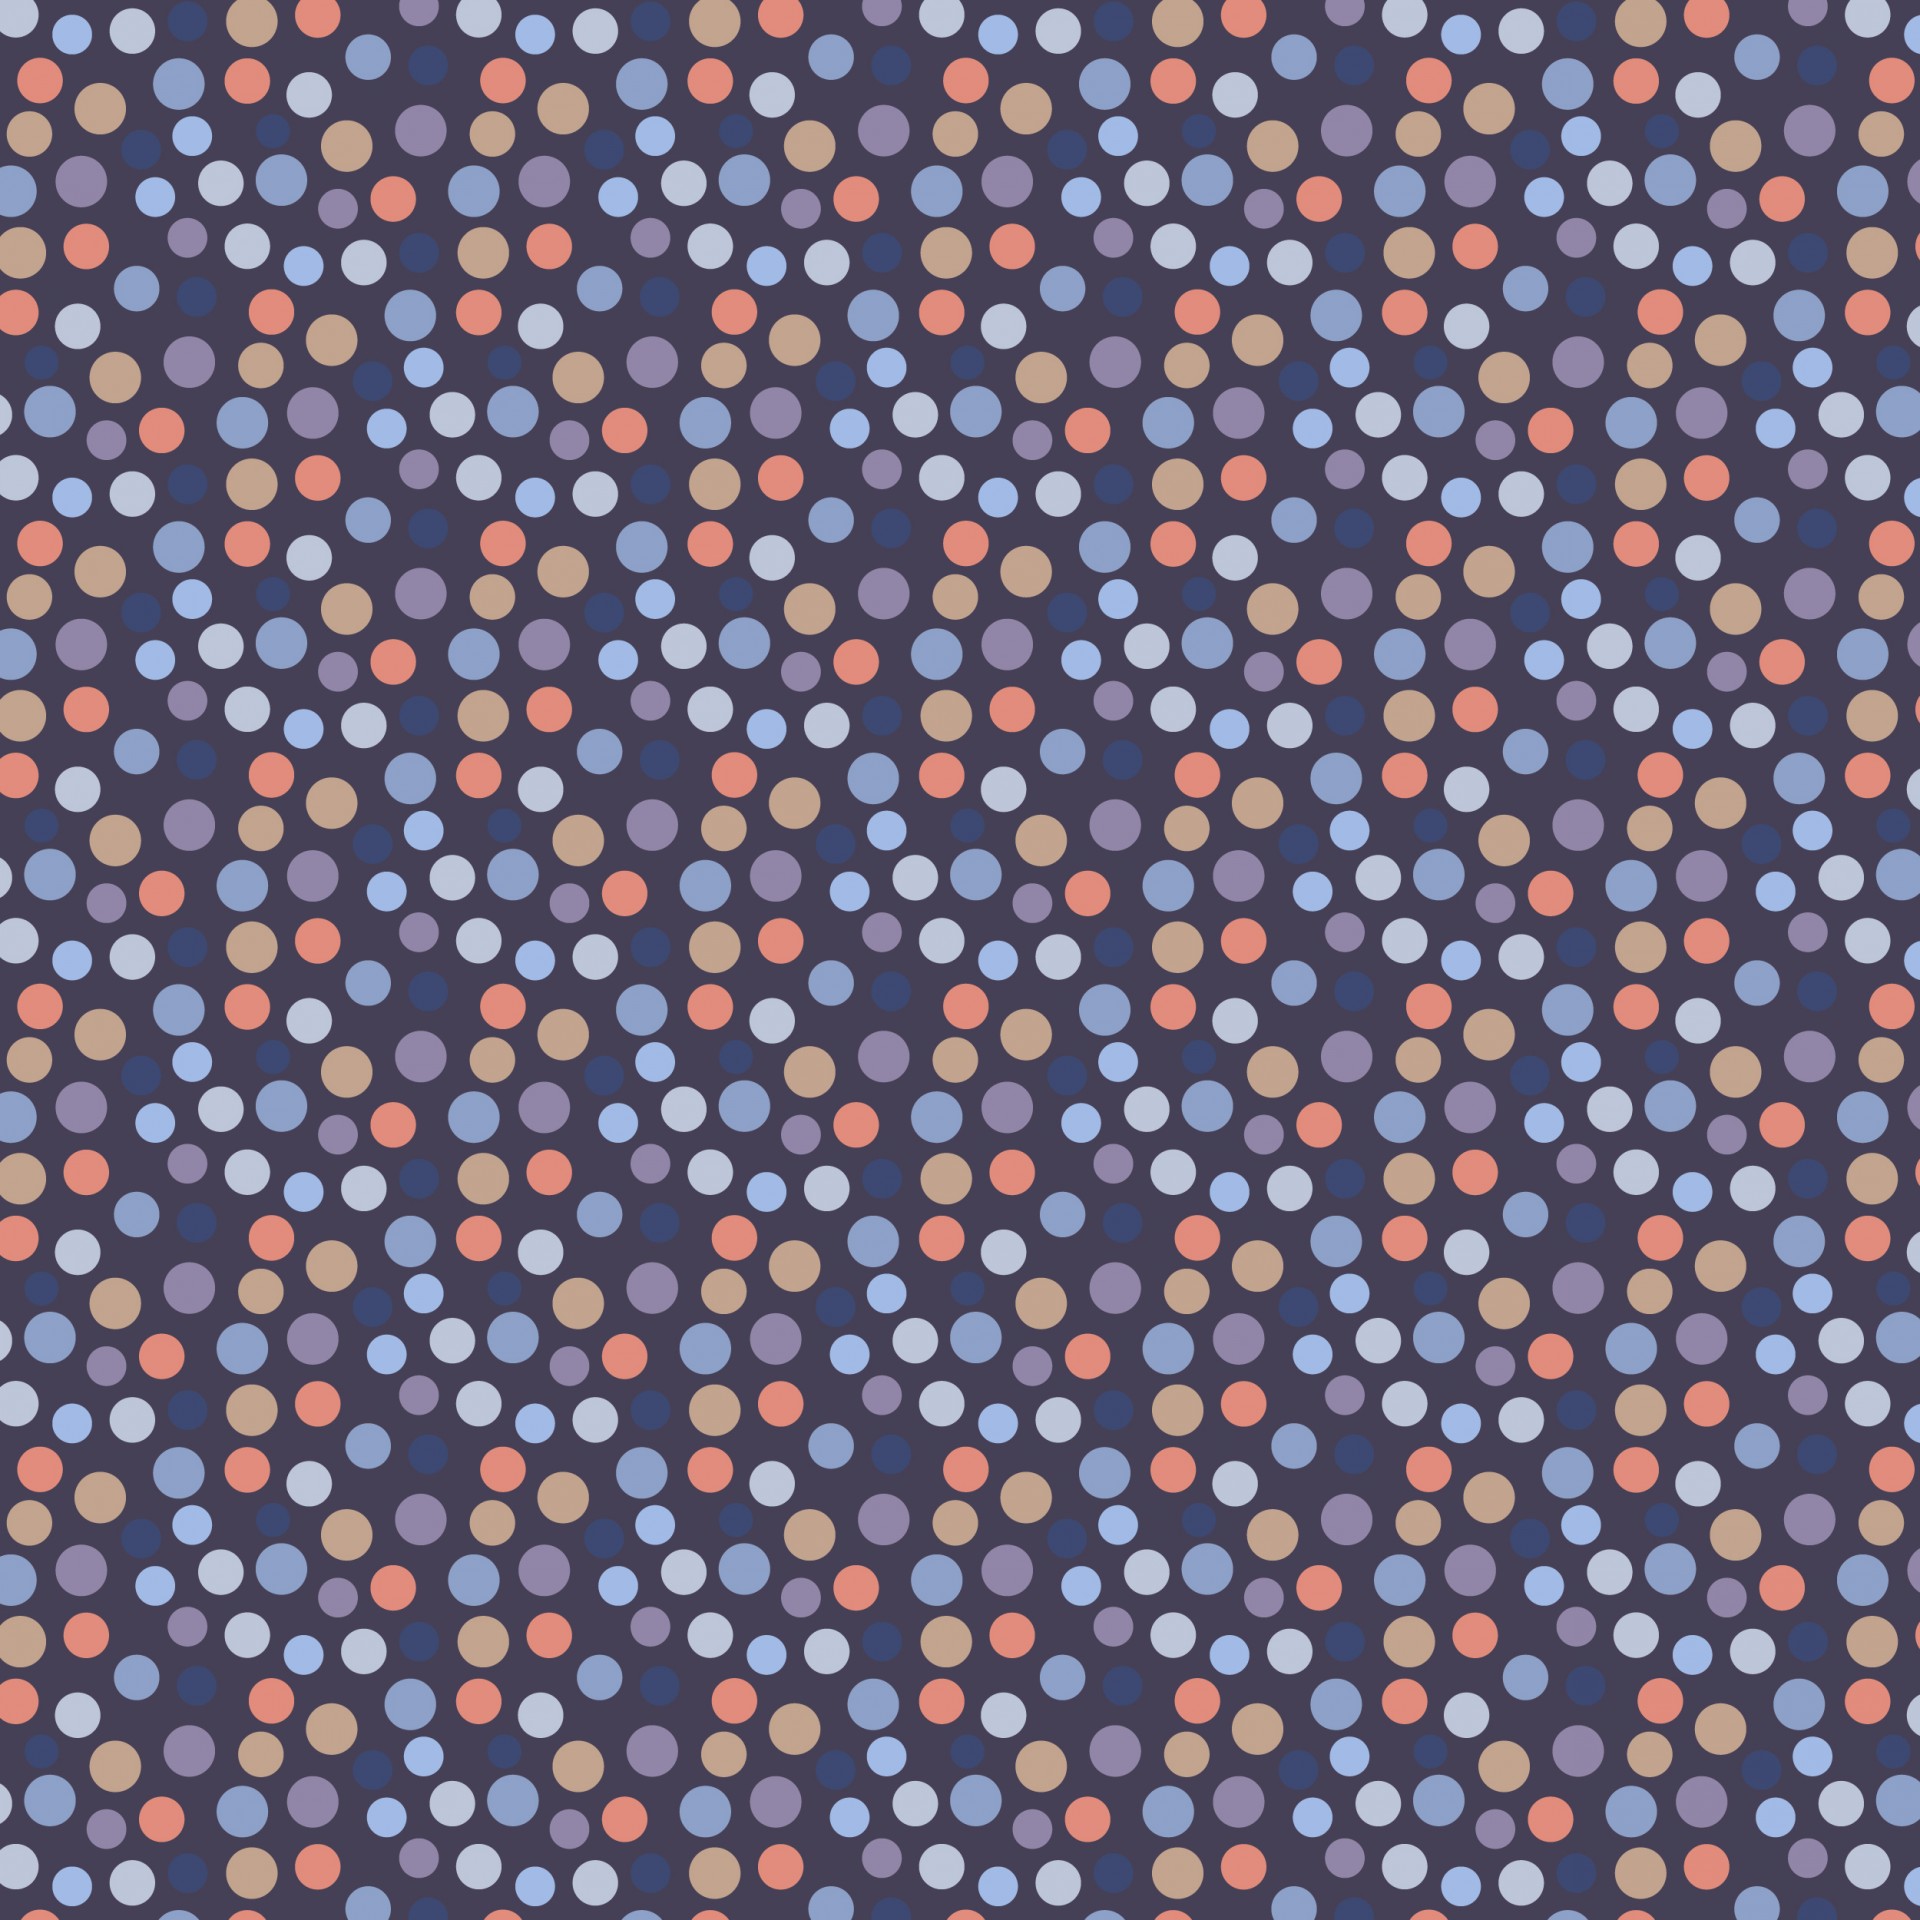 dotted pattern background free photo